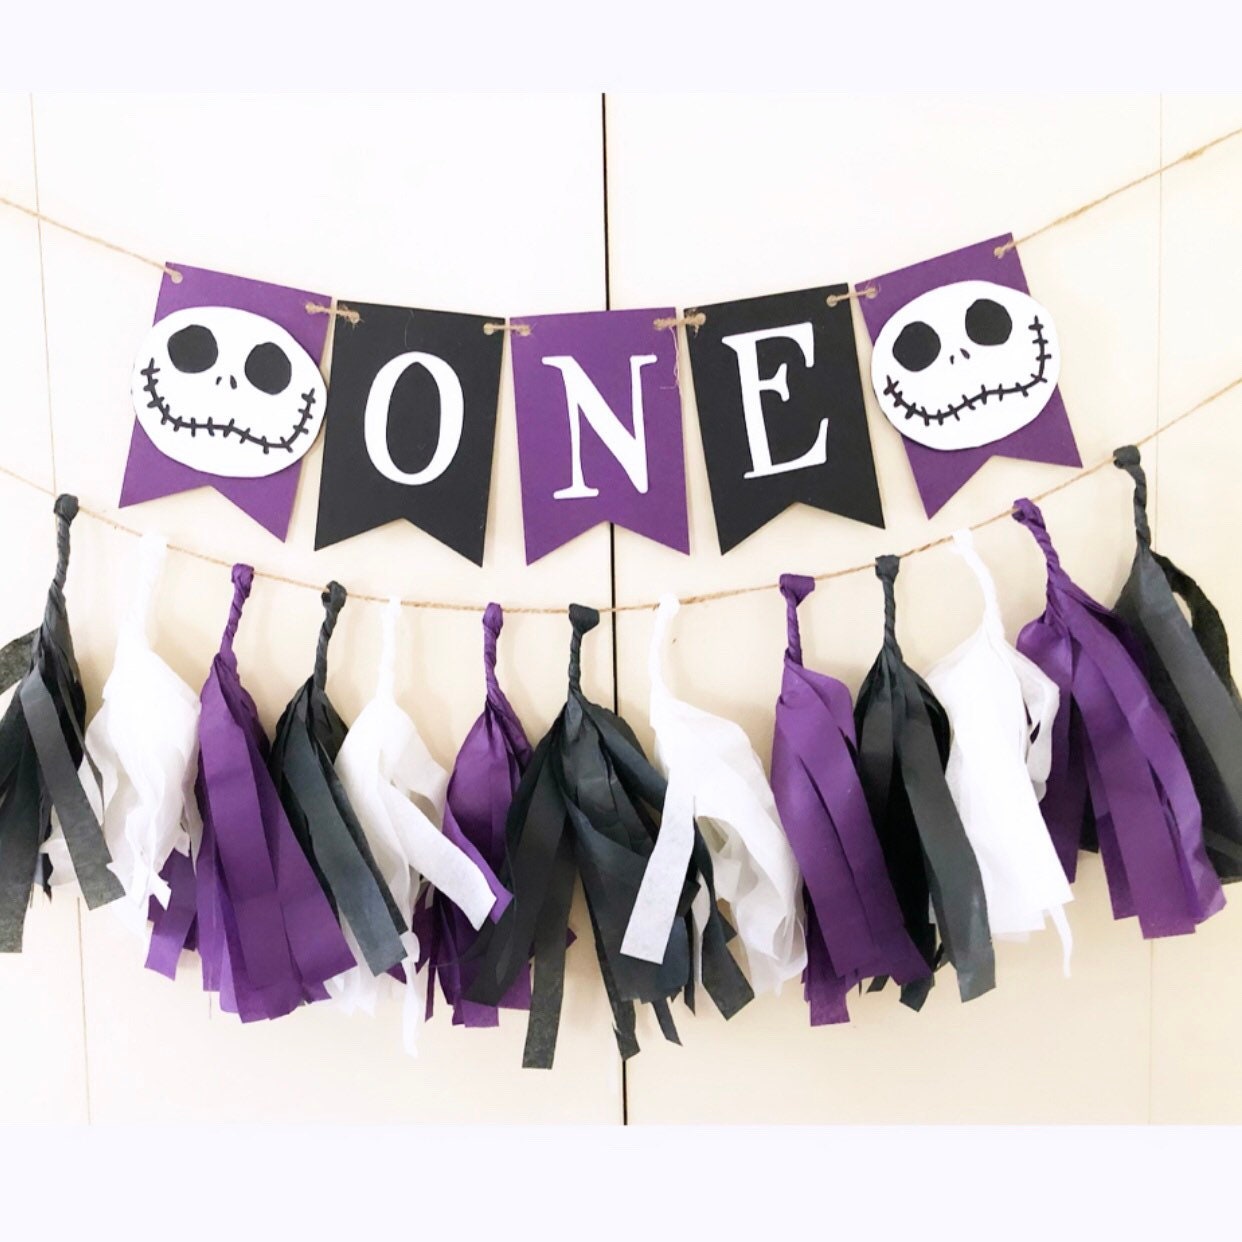 The Nightmare Before Christmas: scary or merry? – The Brantley Banner